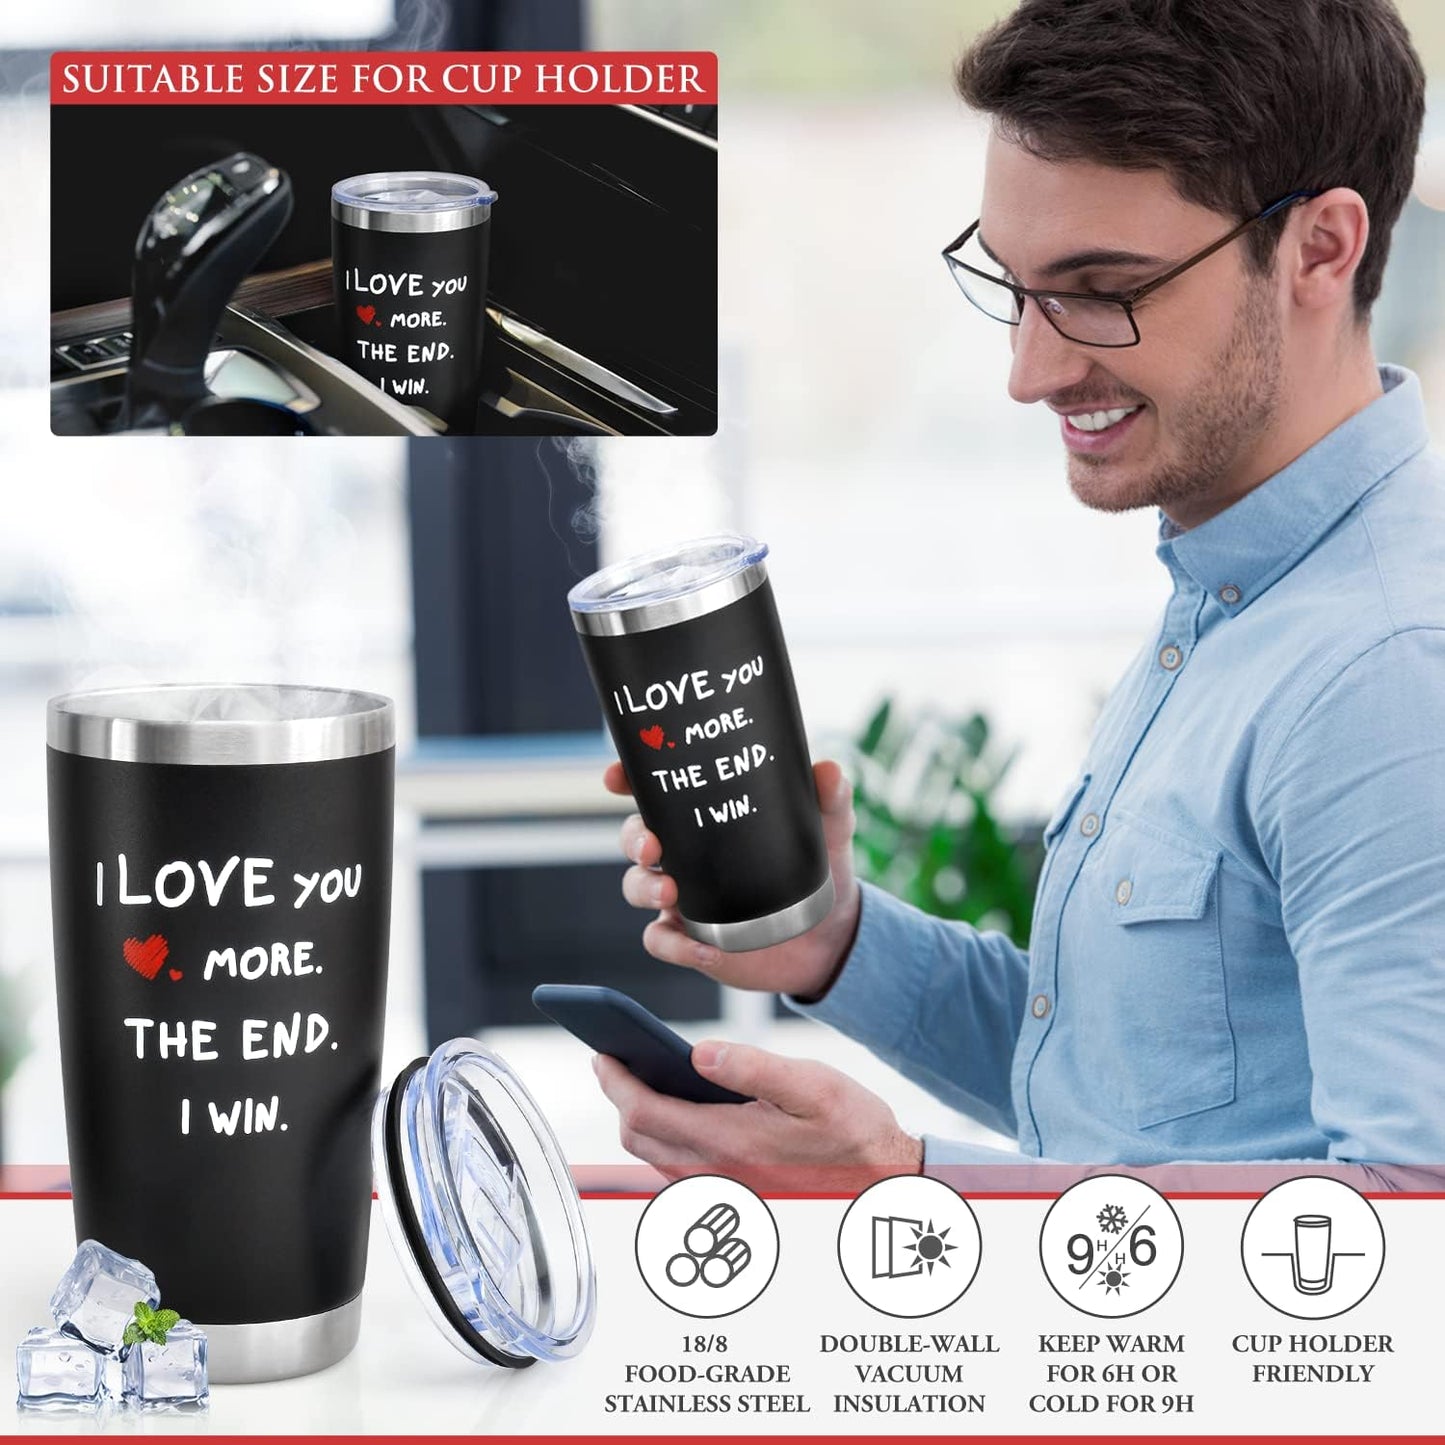 Birthday Gifts for Men, Him, Mens Gifts, Boyfriend Gifts, Gifts for Boyfriends, Husband, Partner, Gifts for Men Who Have Everything, Valentines Gifts for Him, Christmas Gifts for Men